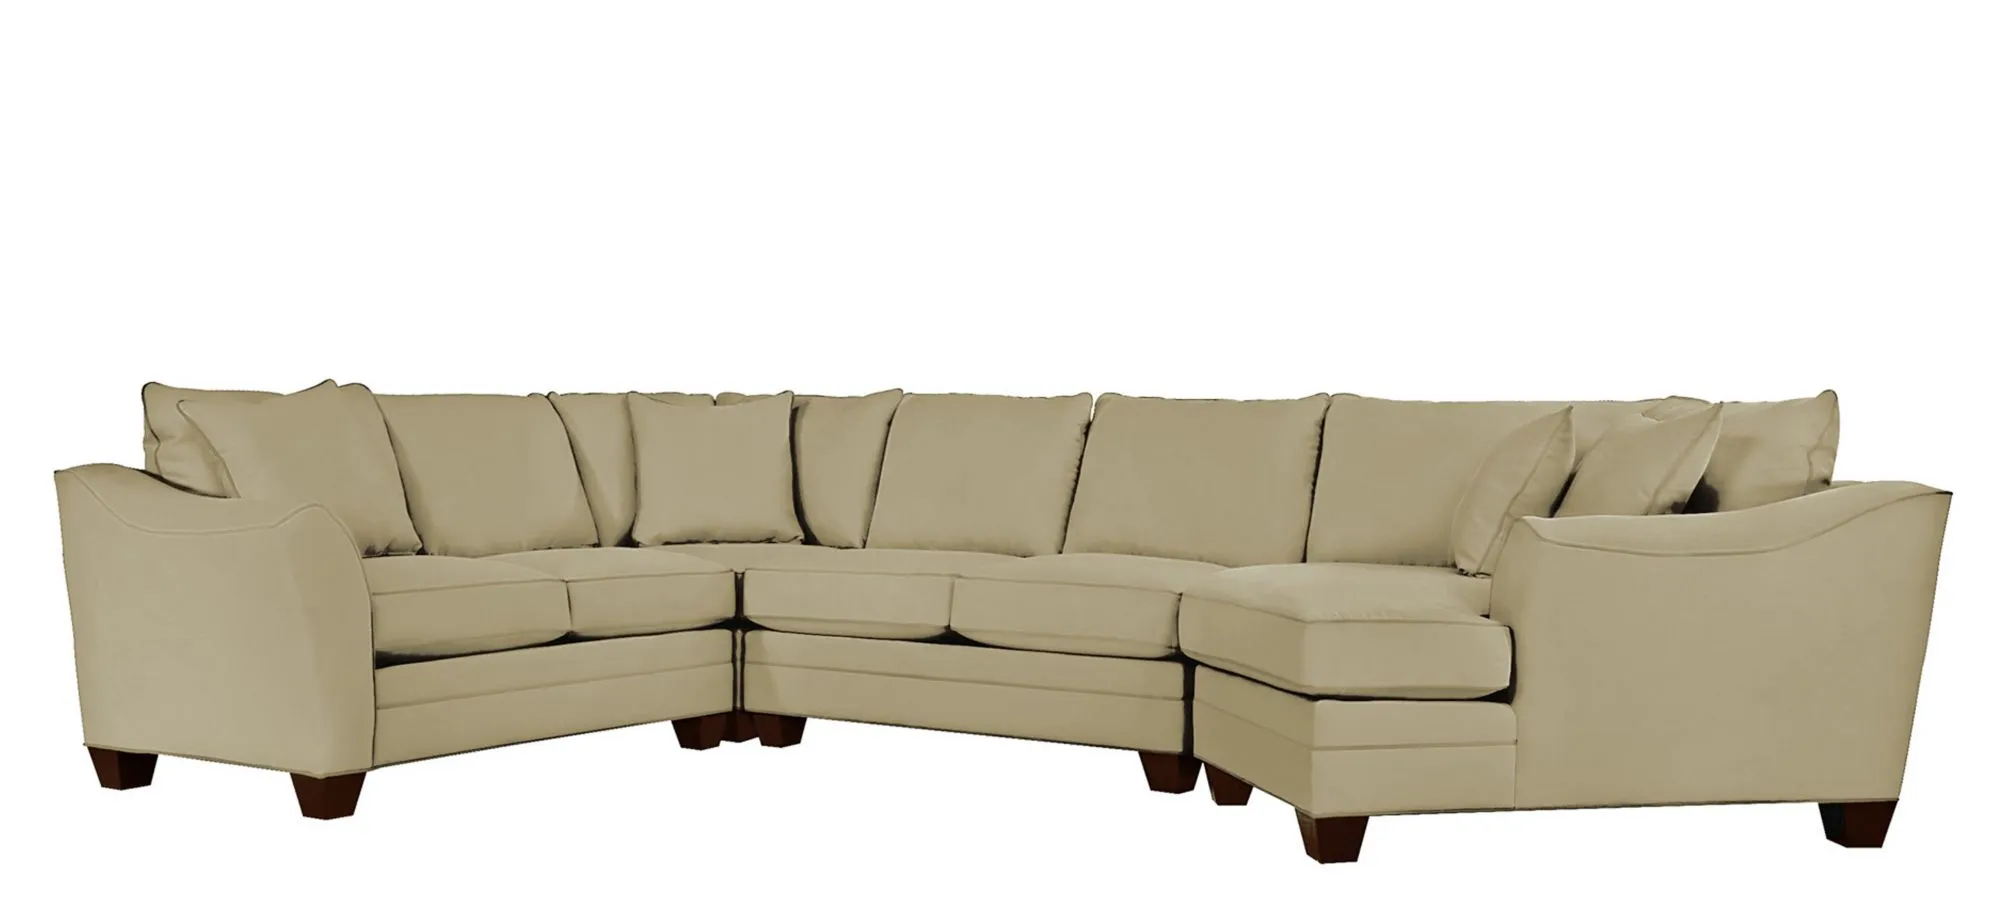 Foresthill 4-pc. Right Hand Cuddler with Loveseat Sectional Sofa in Suede So Soft Vanilla by H.M. Richards